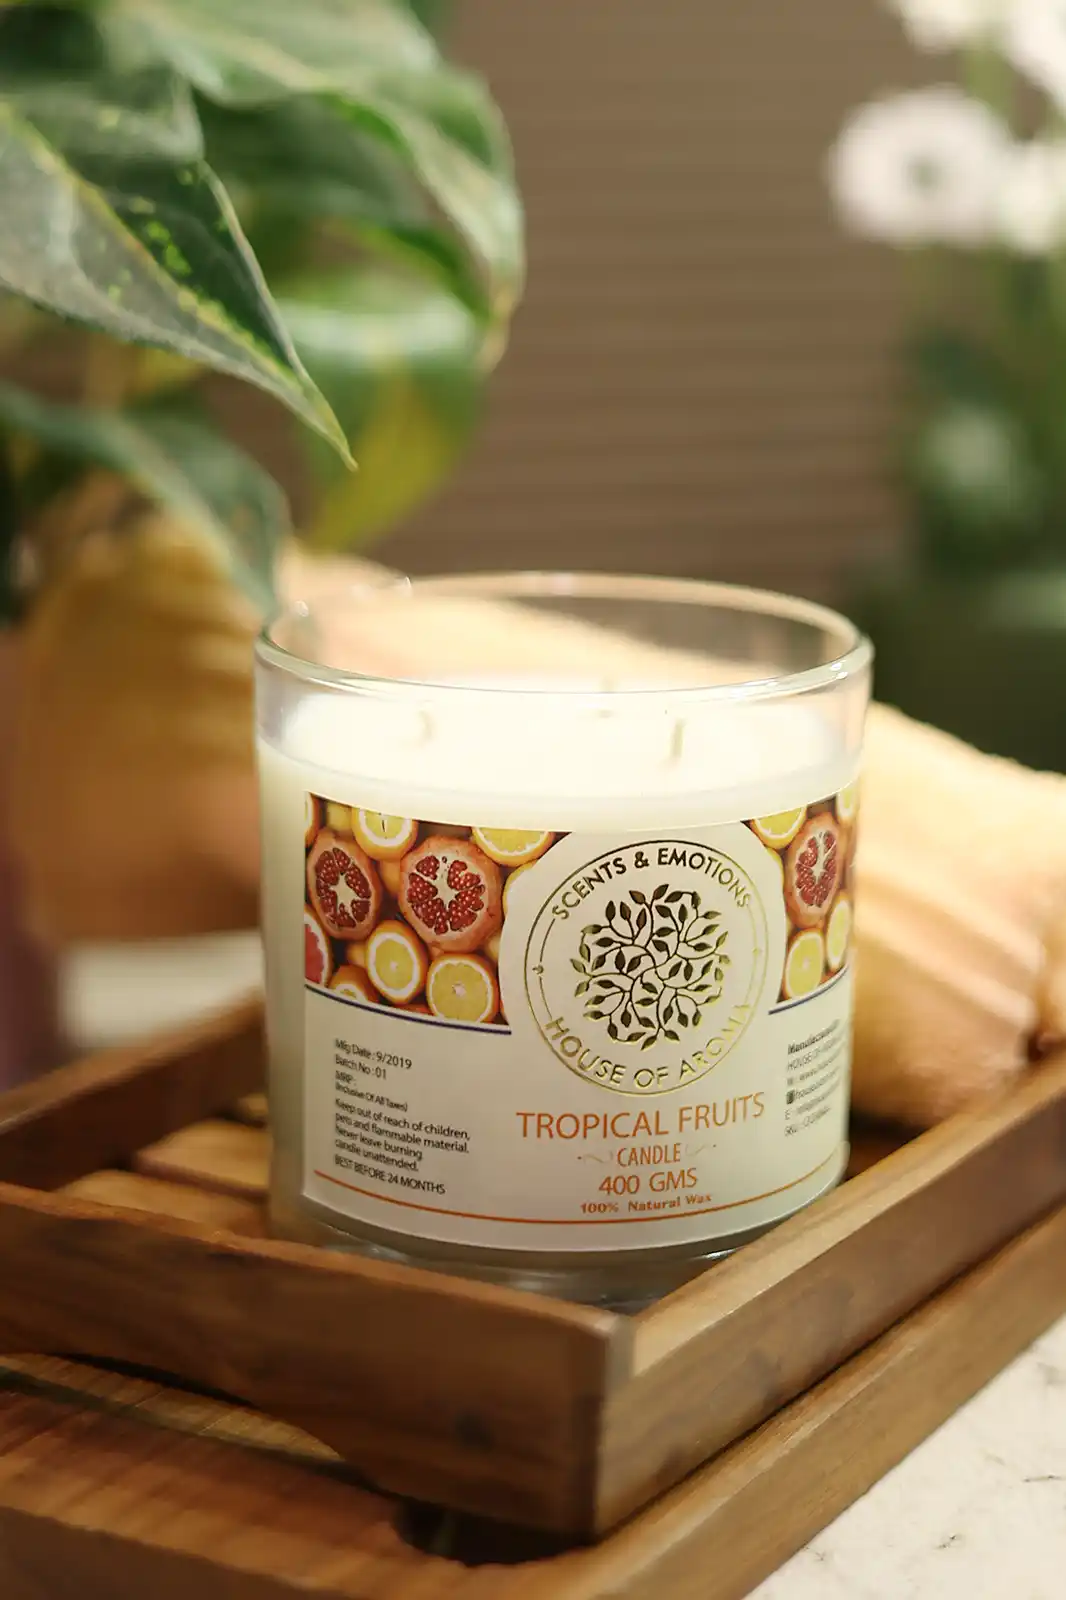 Natural Wax Tropical Fruits 3 Wick Candle, 3 wick candles india, 3 wick candle vanilla, 3 wick candle jars with lids, 3 wick candle container, 3 wick candle jar holder, jar scented candles, fruit fragrance jar candle, fruit flavored natural candle, fruit fragrance candle, fruit fragrance perfume, fragrance candle set, fragrance candle gift set, fruit scented candles, fruity candle scent, fruit fragrance candles,essential oil candles, essential oil for scented candles, essential oil beeswax candles, essential oil blends candles, essential oil candles non toxic, vegan essential oil candles, essential oil organic candles, pure essential oil candles, House of Aroma, home decor candle, room decor candles, scented candles decoration, best candles for home decor, scented candles for home decor, room decor with candles, decorating homemade candles, home decor scented candles, natural scented candles, natural scents for candles, organic scented candles India, luxury scented candles India, natural soy candle wax, natural fragrance for candles, natural soy candle company, best scented candles India, scented candles for bedroom, organic, scented candles India, most fragrant scented candles, glass jar candles, bell jar candles, bell jar candle, bell jar candle India, essential oil wax candle, soy wax essential oil candles, essential oil wax candles, natural scented candle brands, scented candles best brand, candle brands in India, organic scented candles India, best scented candle brands in India, top candle brands in India, best candle brands in the world, bedroom candles, room fragrance candles, best bedroom candles, best room scented candles, room freshener candles, beeswax candles, beeswax candles scented, beeswax candles jar